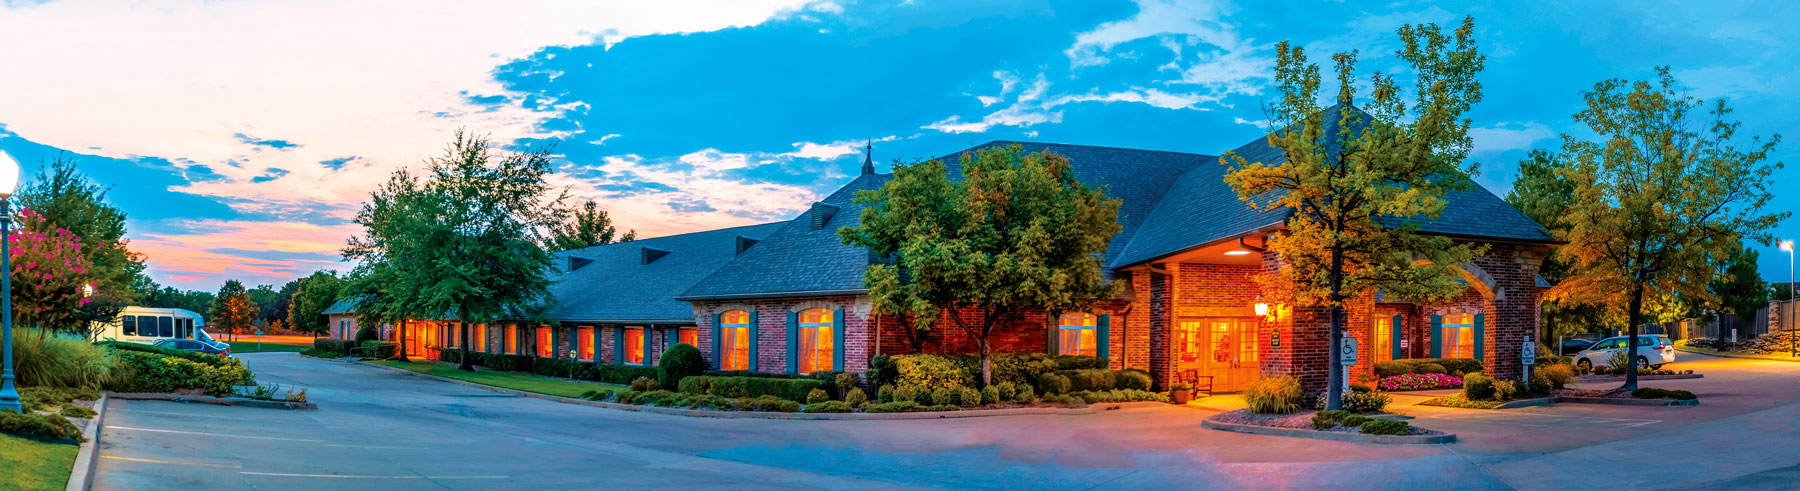 Assisted Living Tulsa | Assisted Living in Tulsa | The Parke